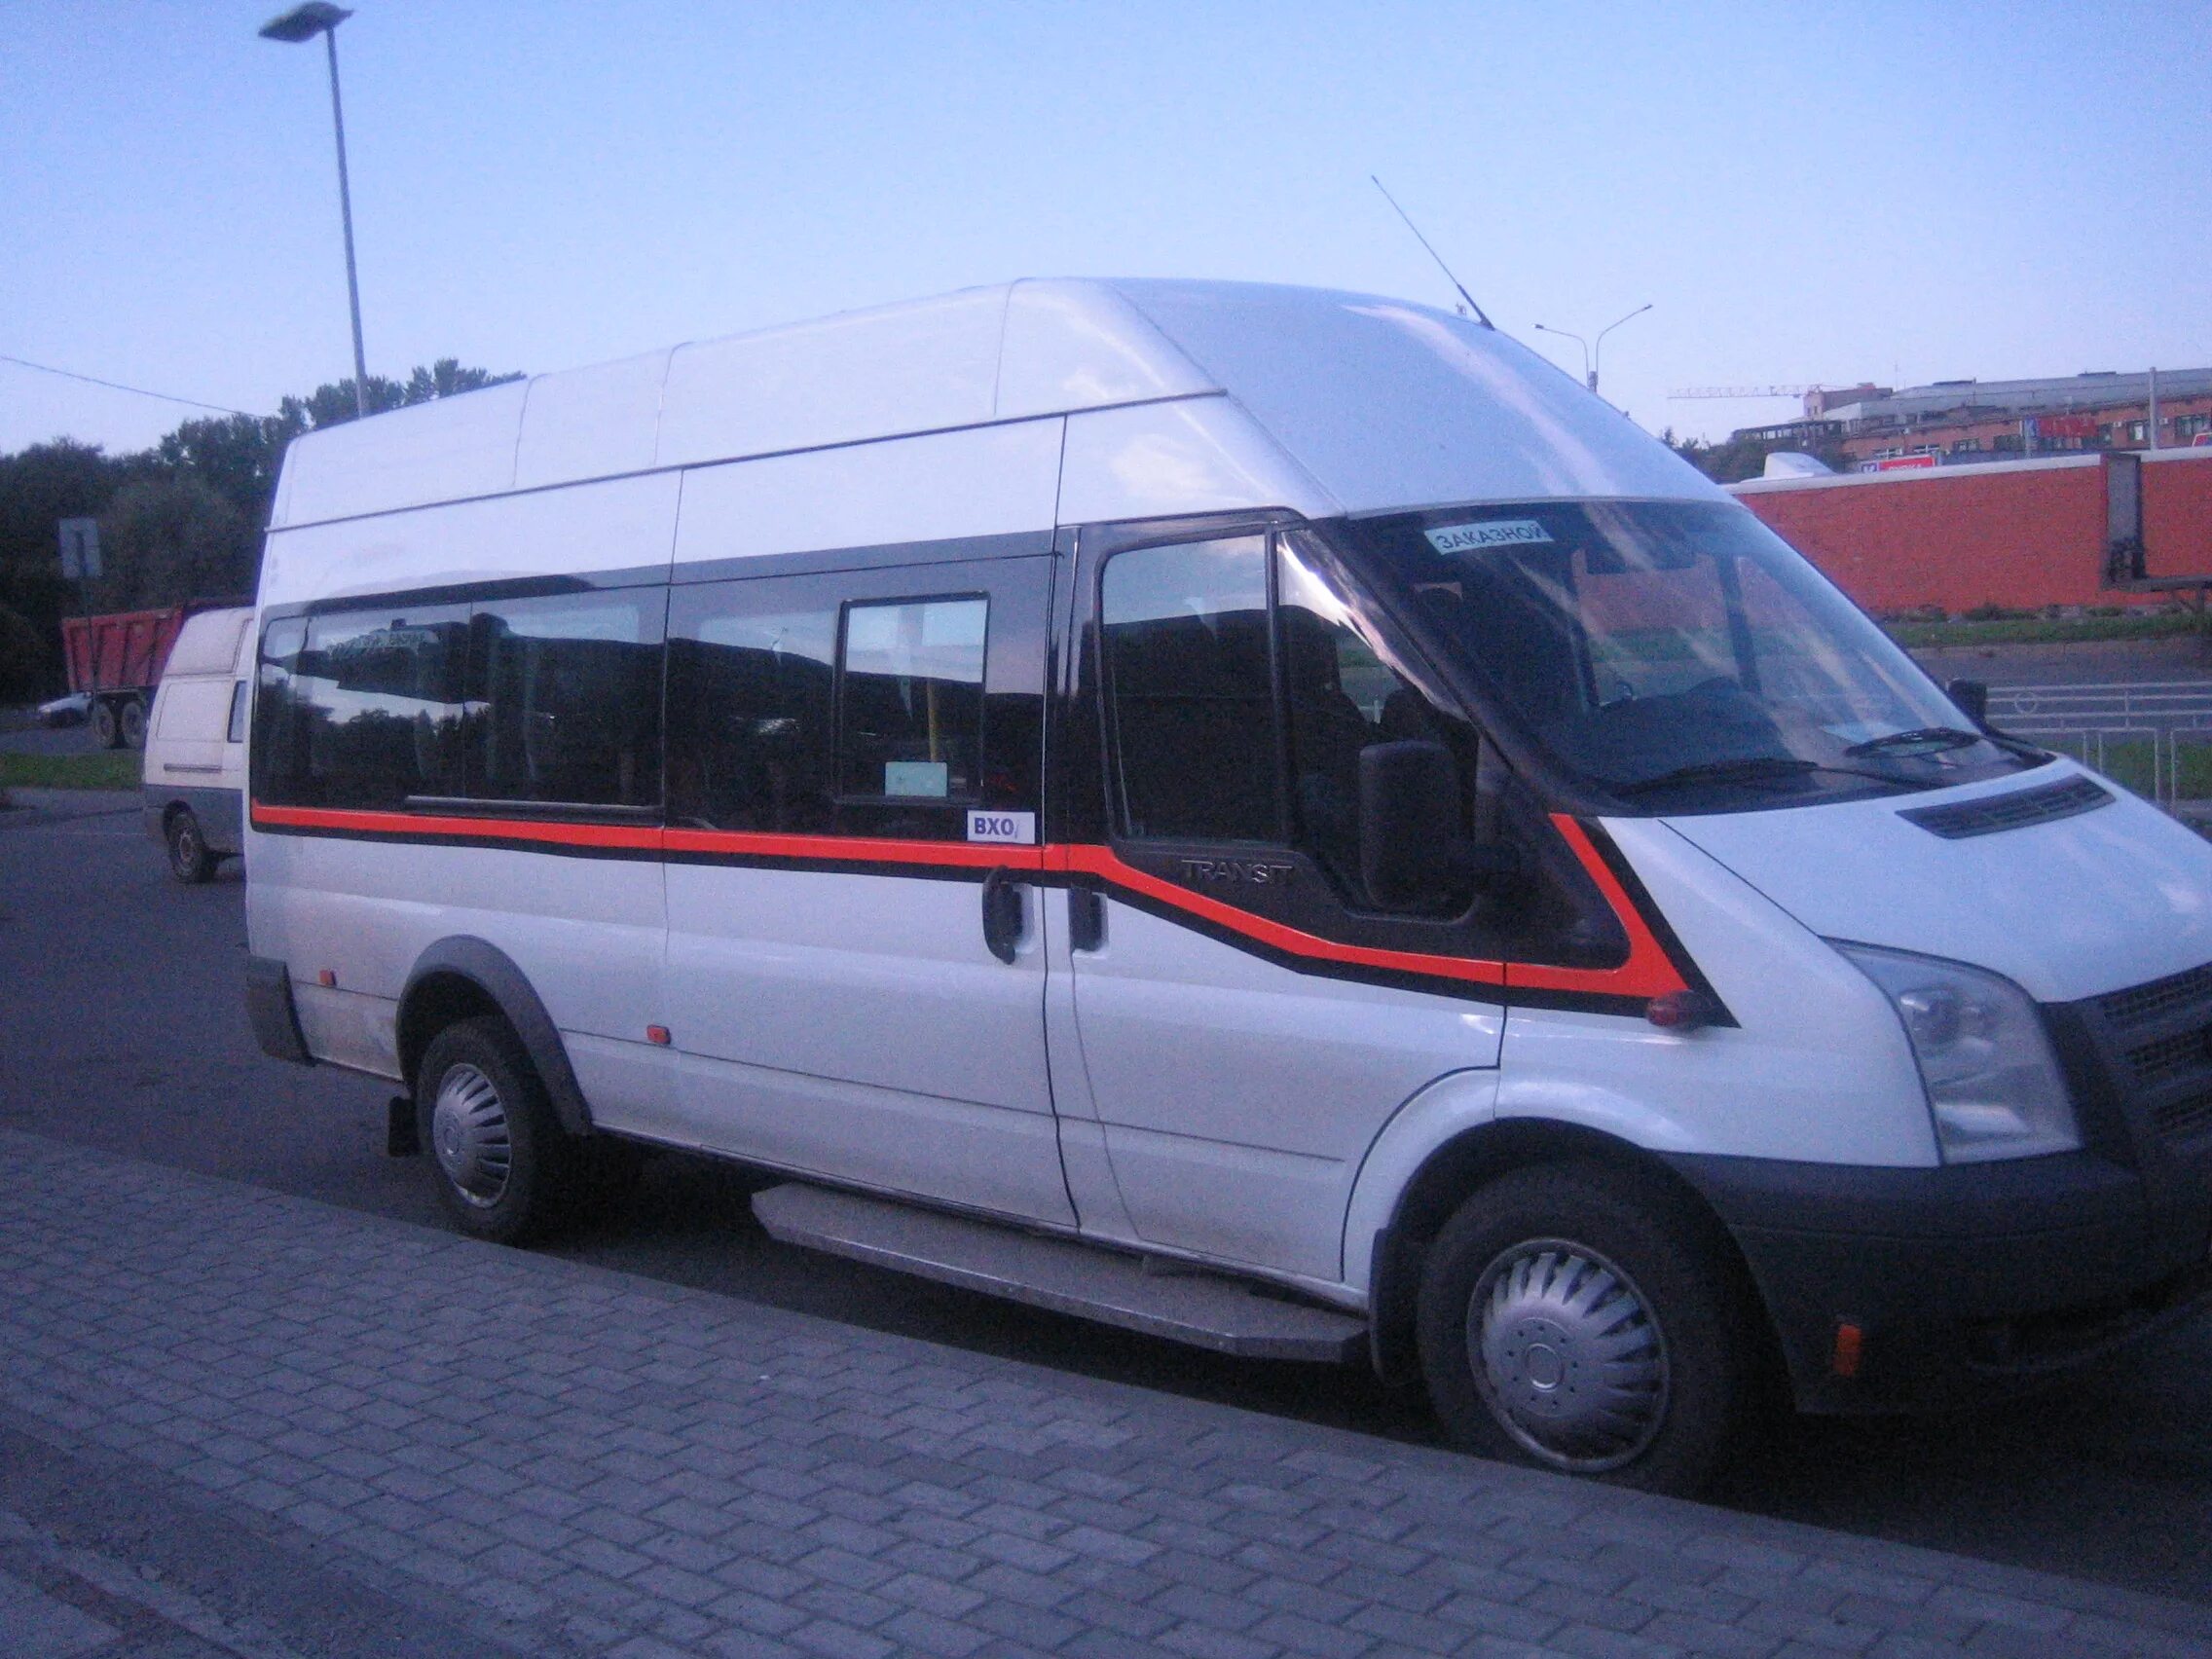 Ford Transit 19. Форд Транзит(19+6). Ford Transit 19 мест. Форд Транзит 19 года.